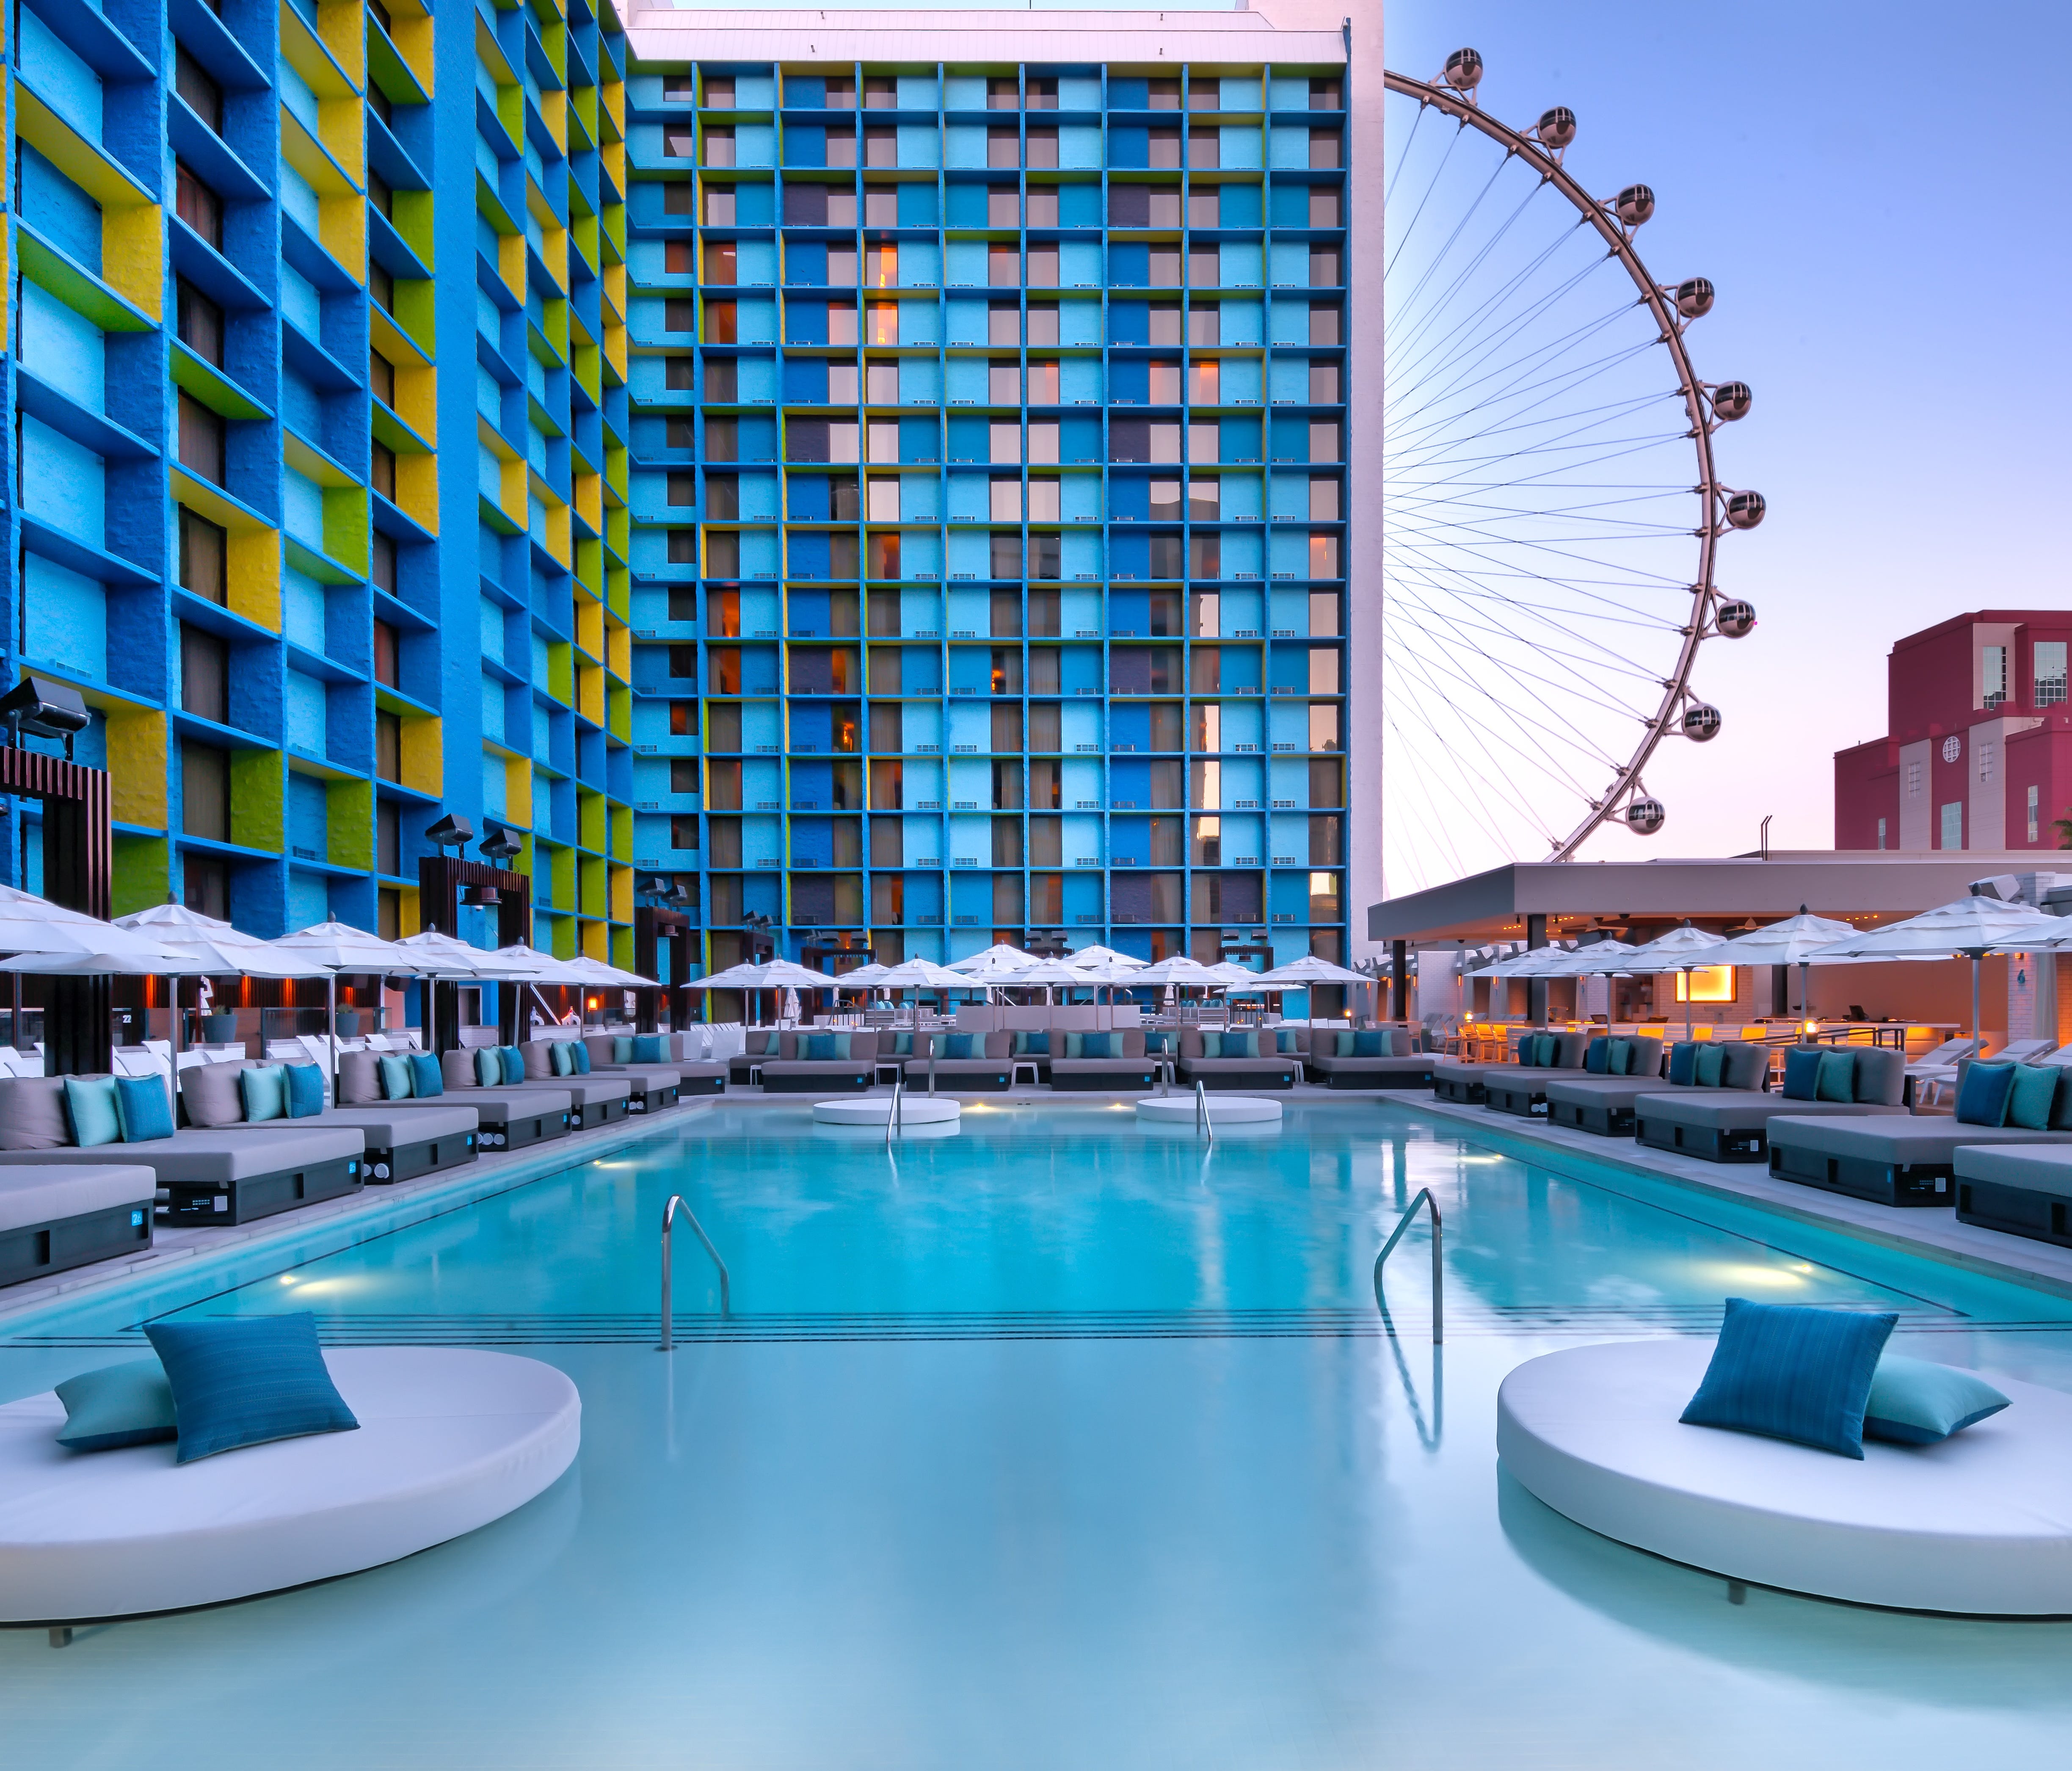 The LINQ Pool deck hosts two pools, 35 daybeds, 24 cabanas, a bar, TVs and lily pad daybeds for rent. The pool is free and exclusive to hotel guests.